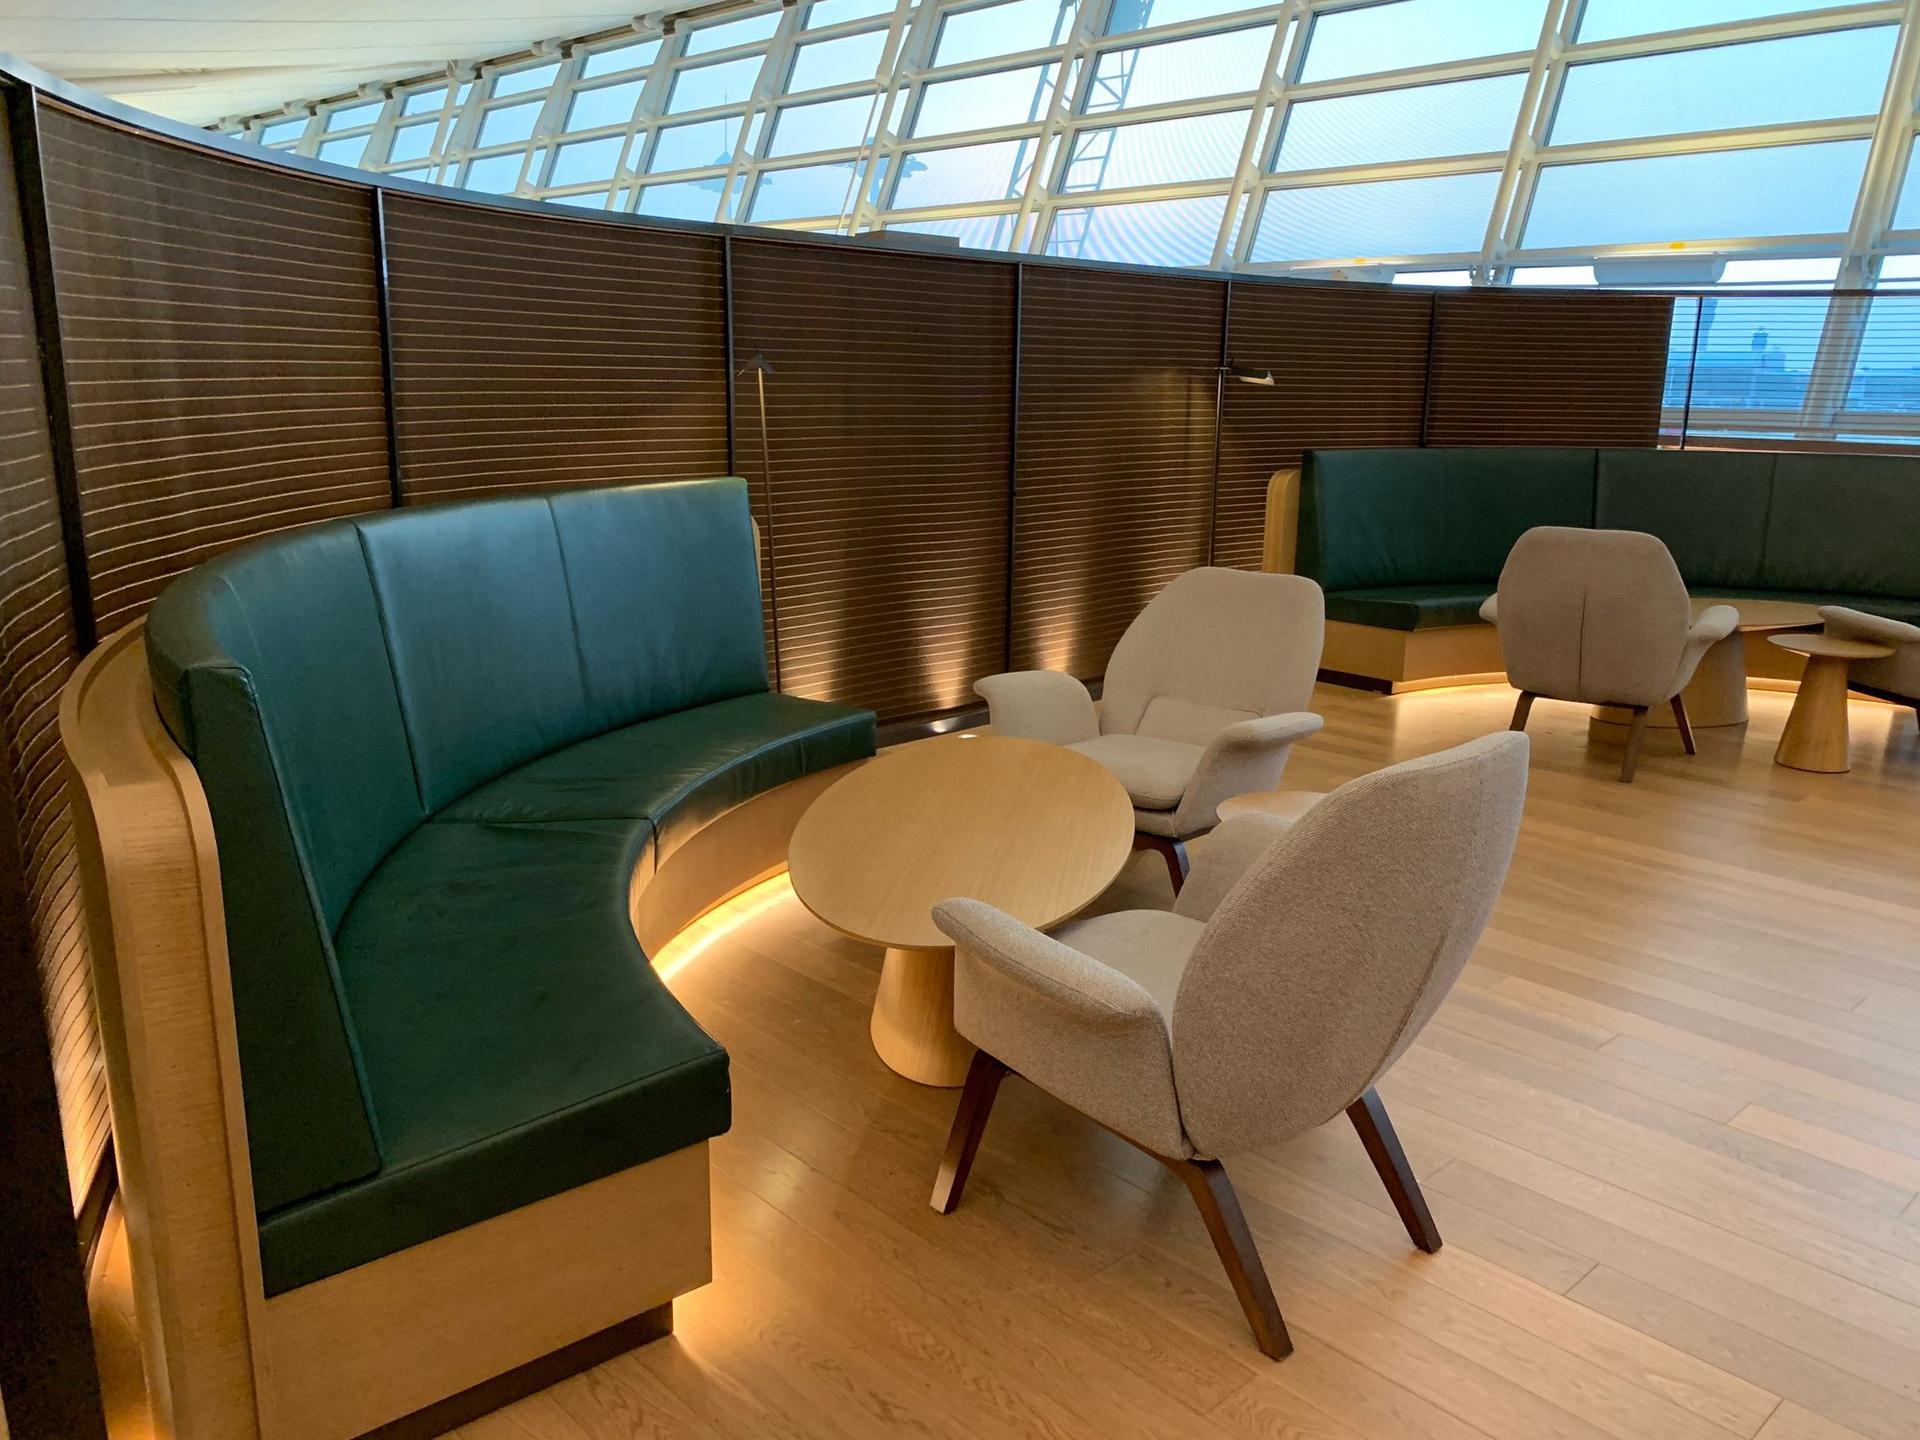 Asiana Airlines Business Class Lounge (East) image 1 of 59